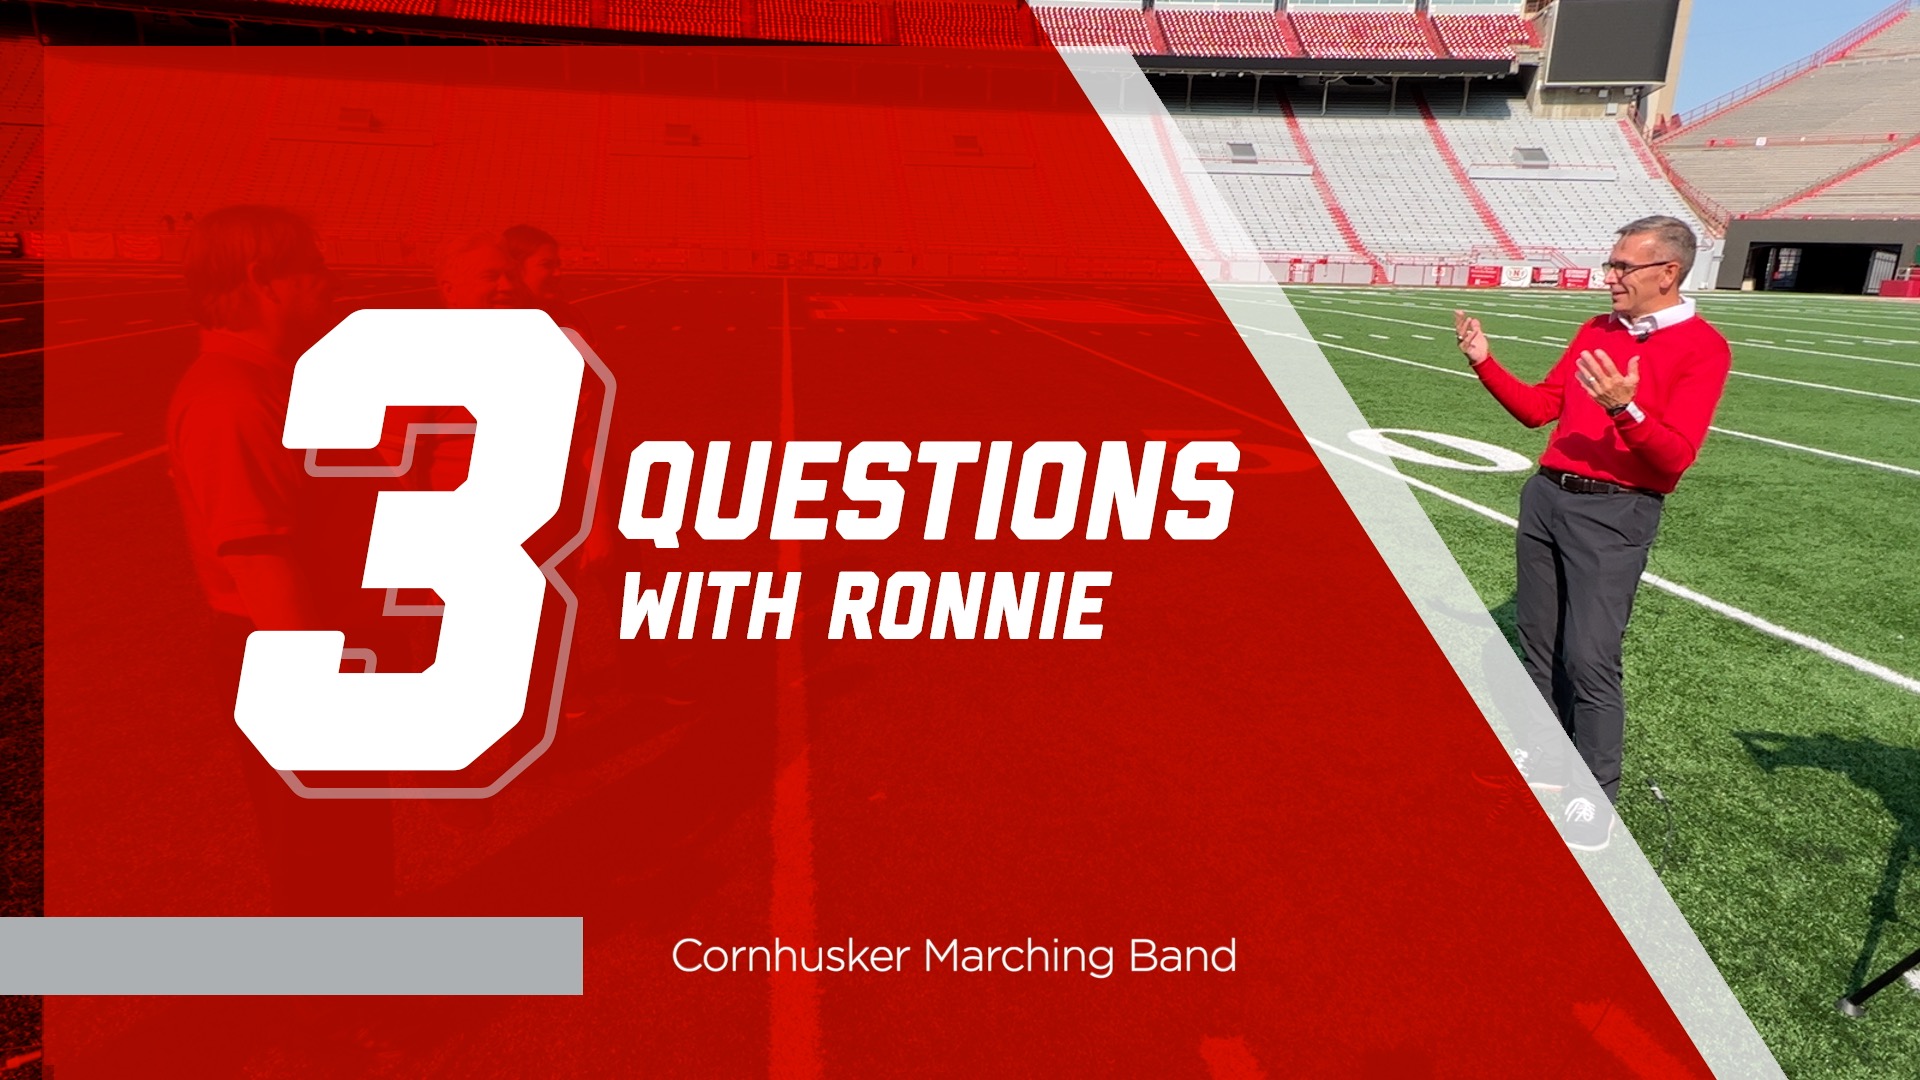 3 Questions with Ronnie | Cornhusker Marching Band